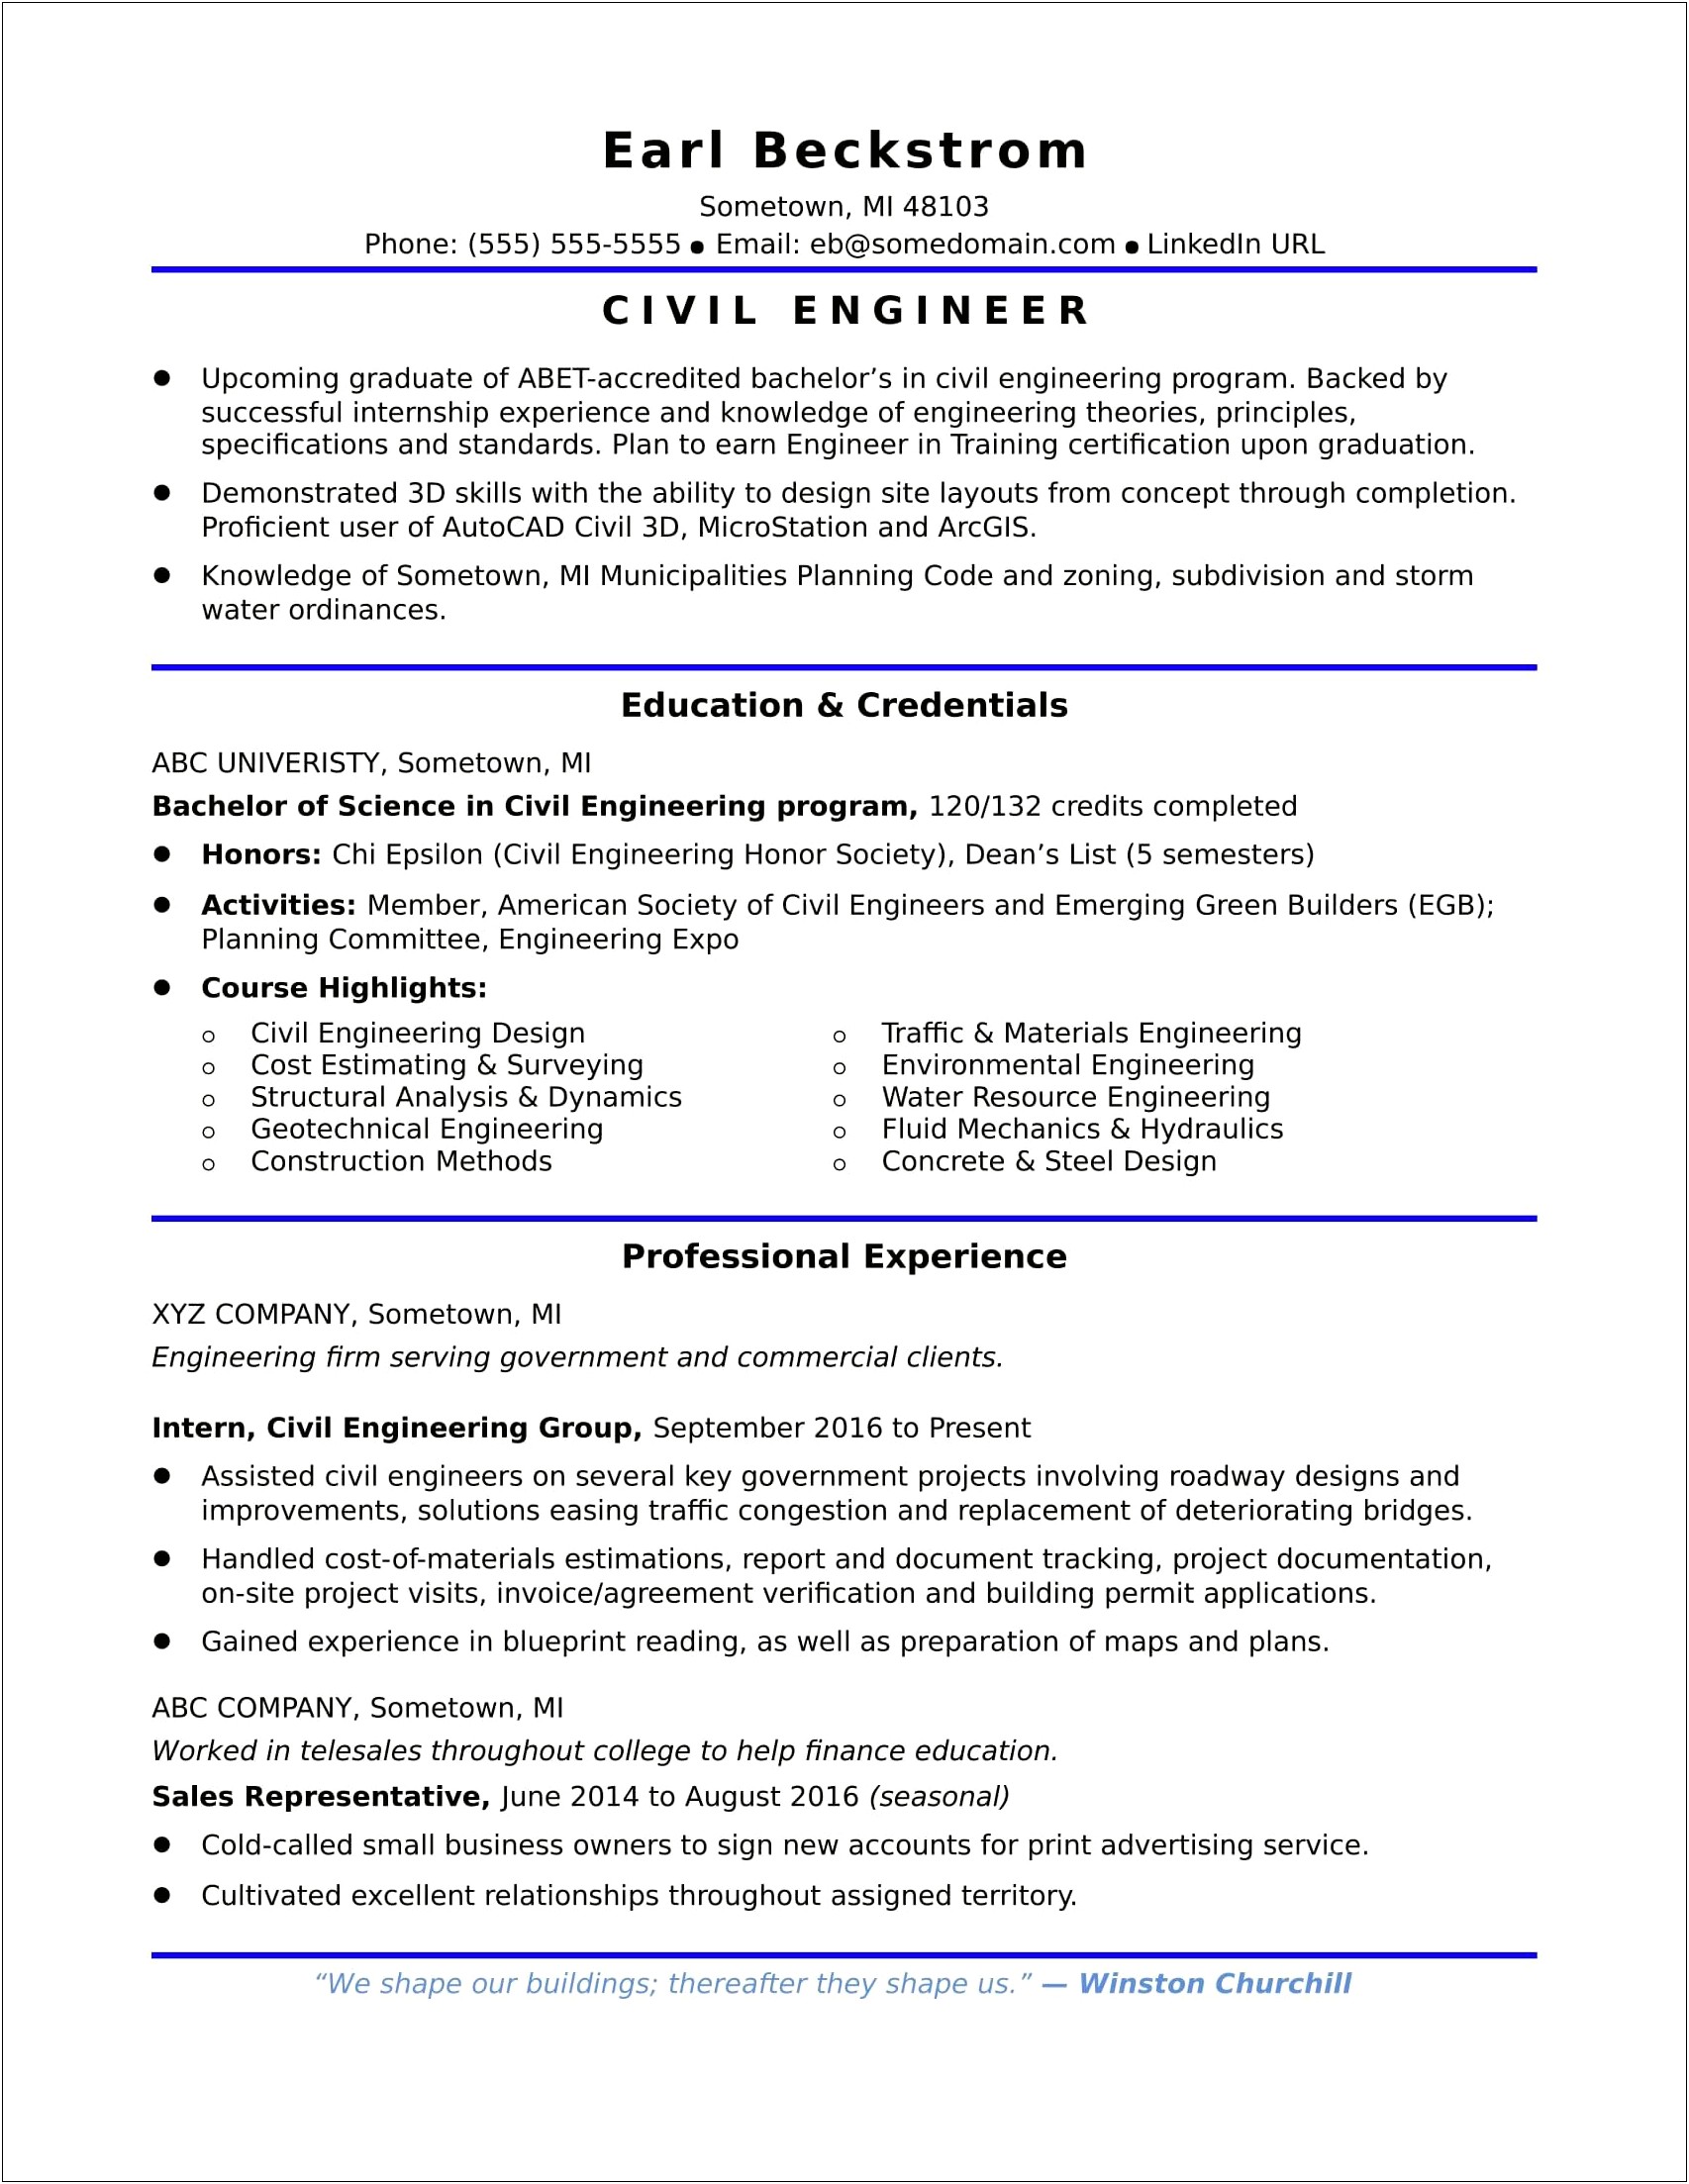 Worked Alongside Other Interns Experoence For Resume